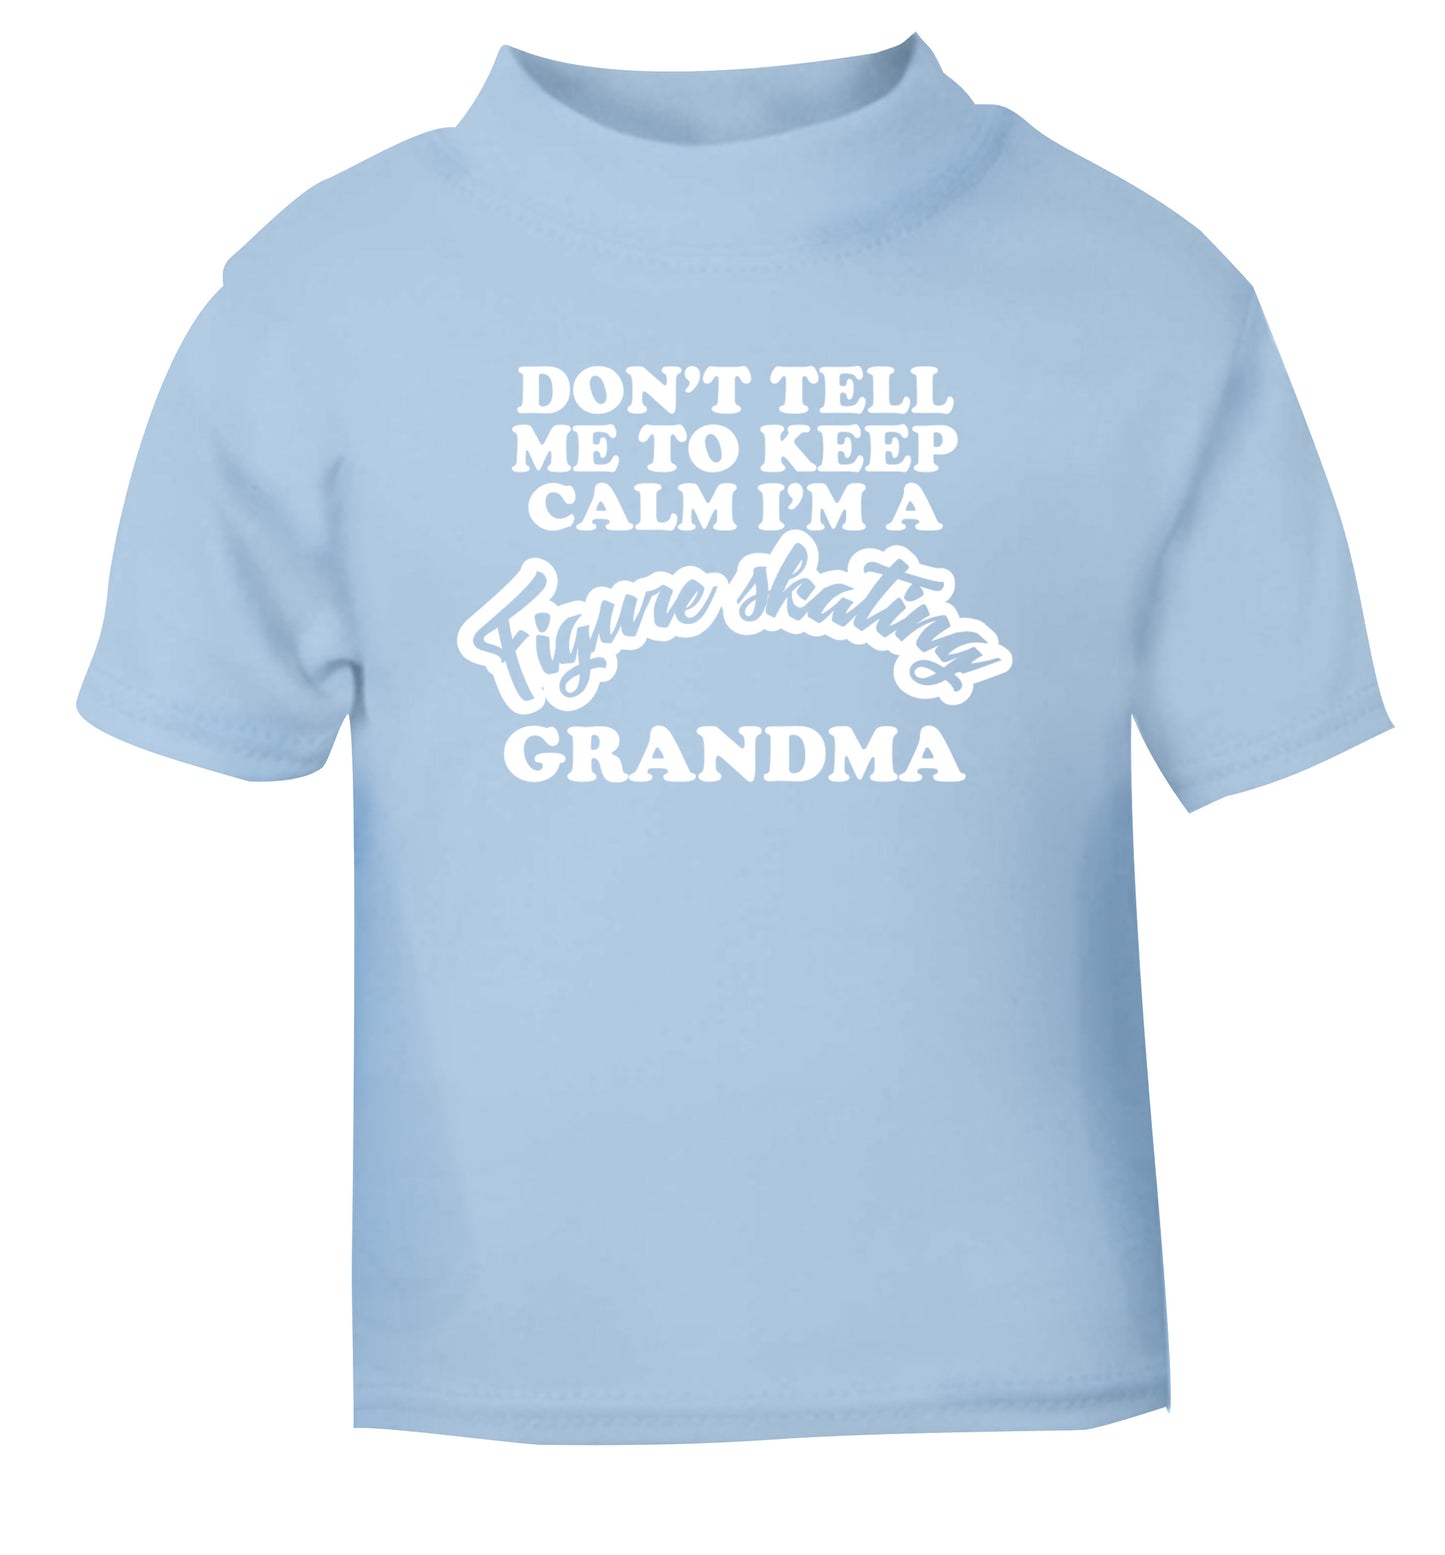 Don't tell me to keep calm I'm a figure skating grandma light blue Baby Toddler Tshirt 2 Years